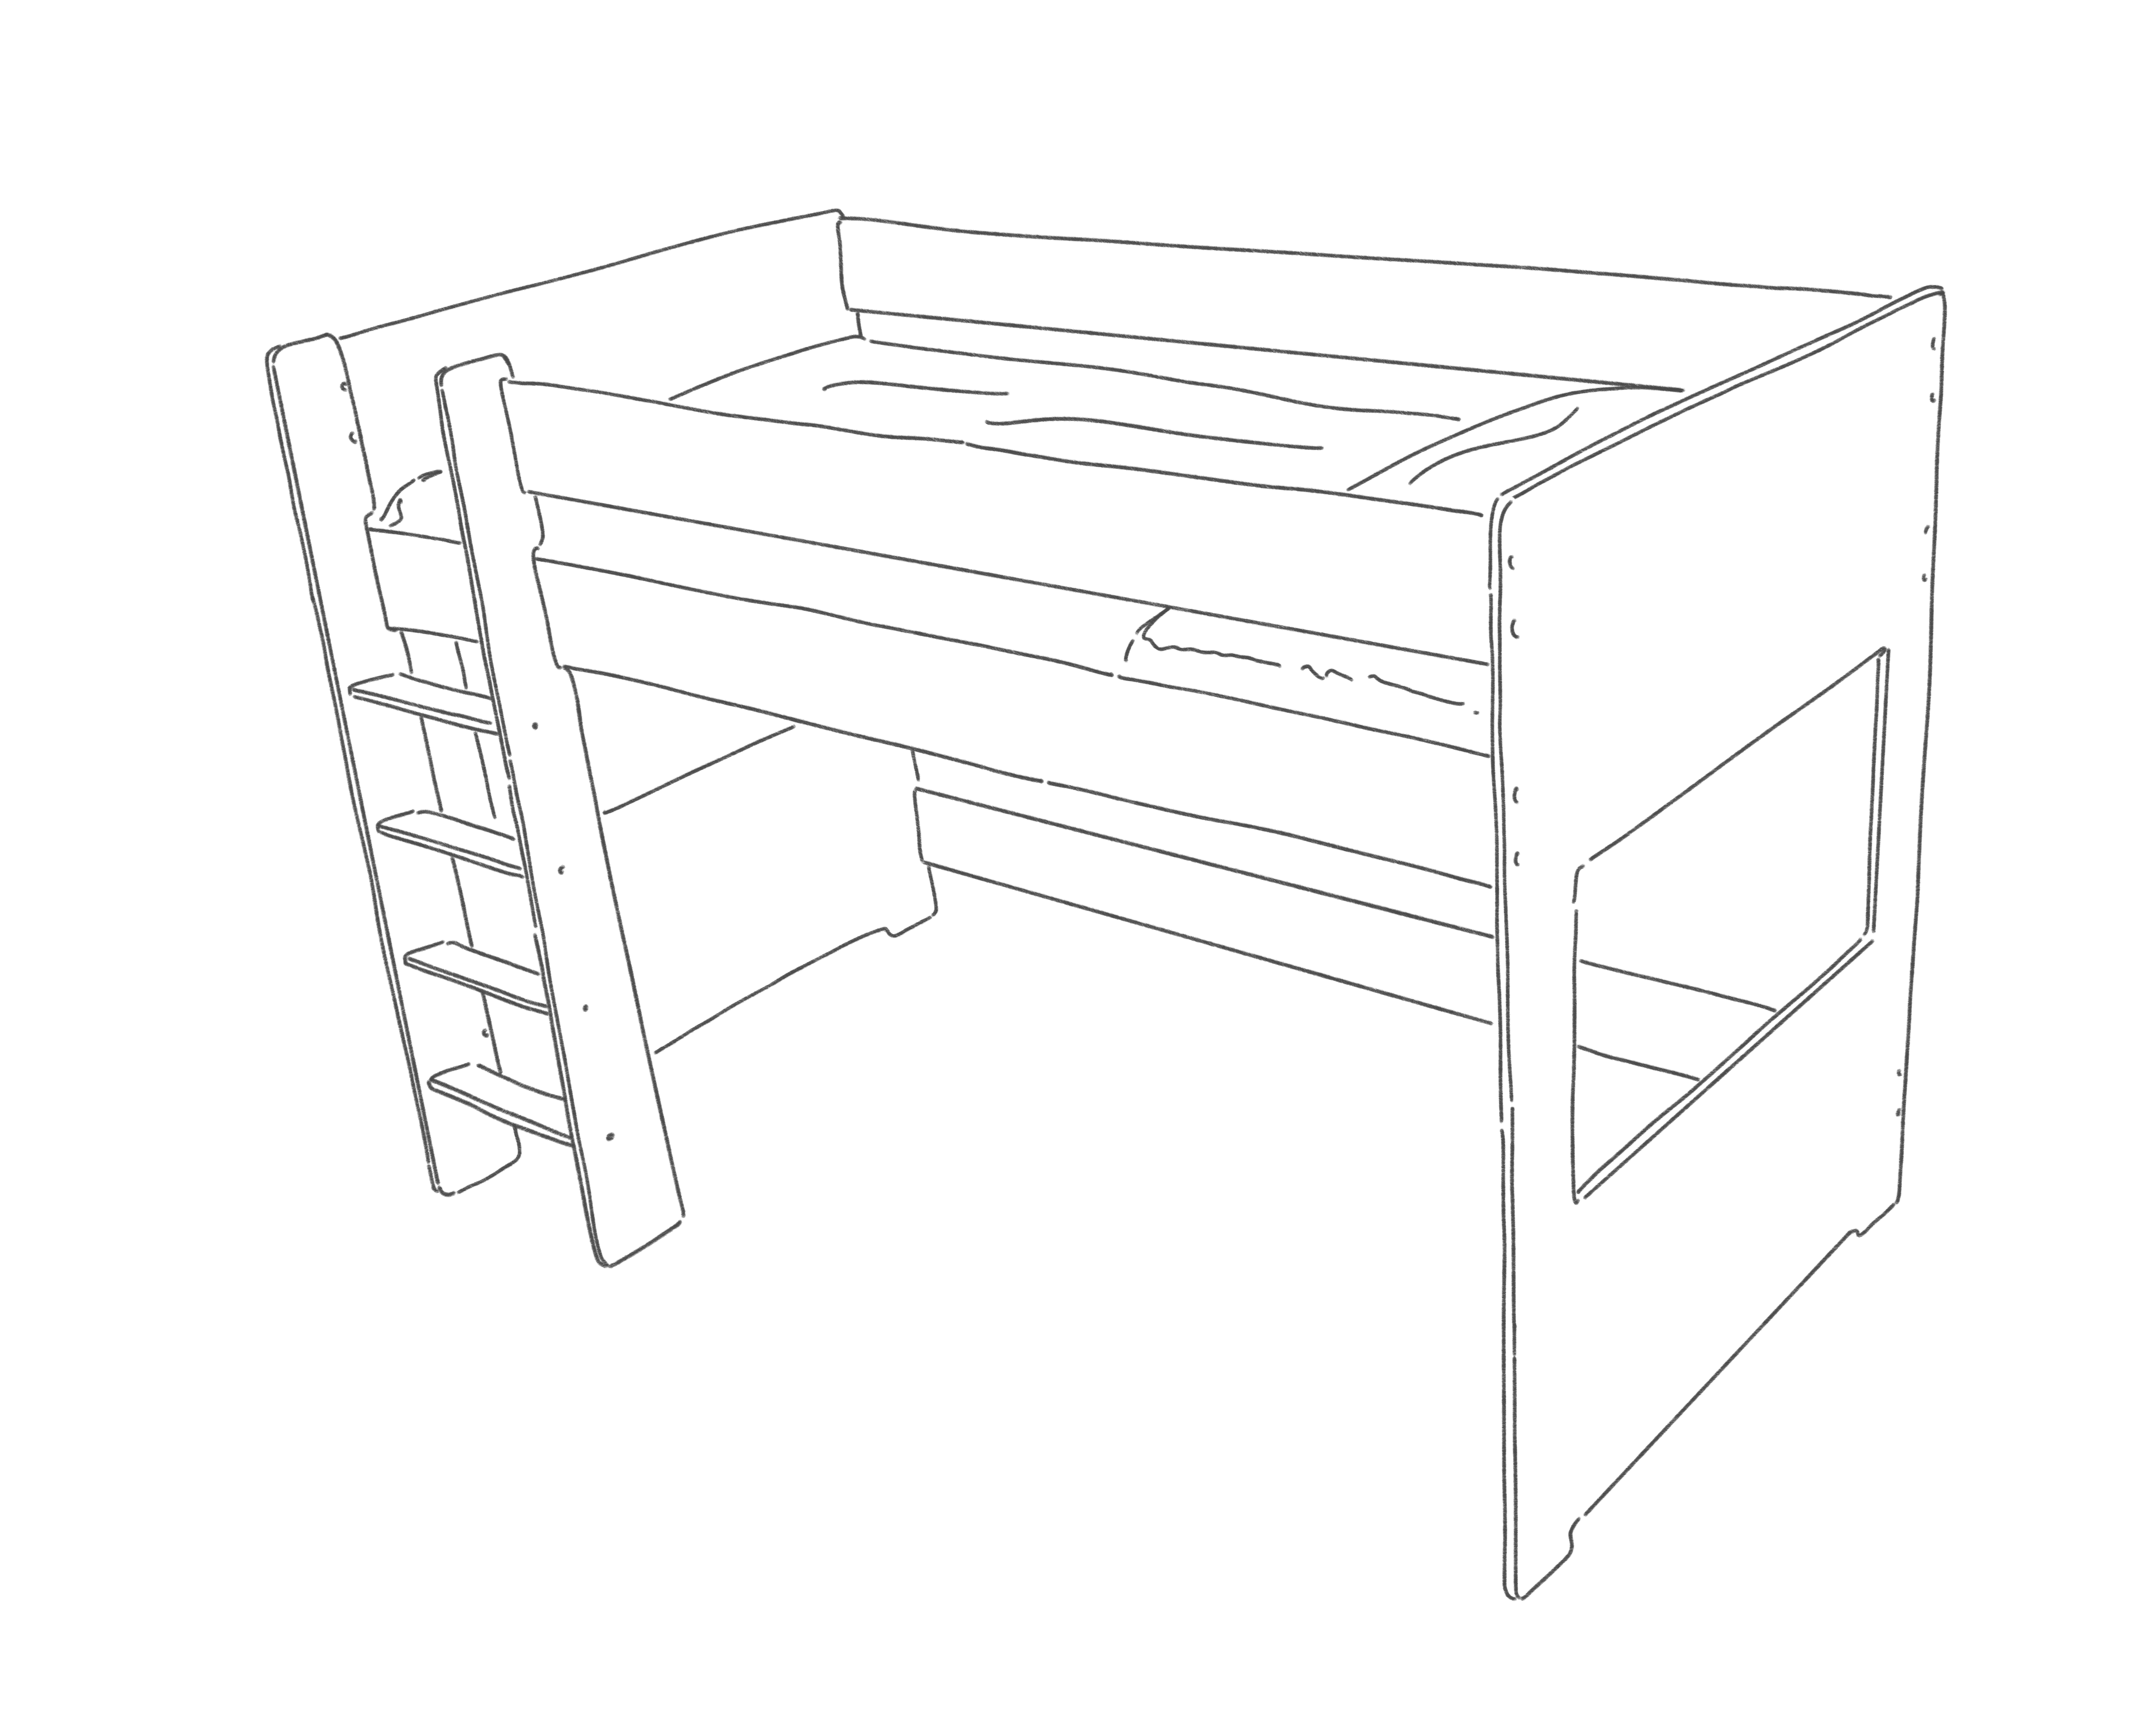 Sketch of a loft bed custom made out of birch multiply